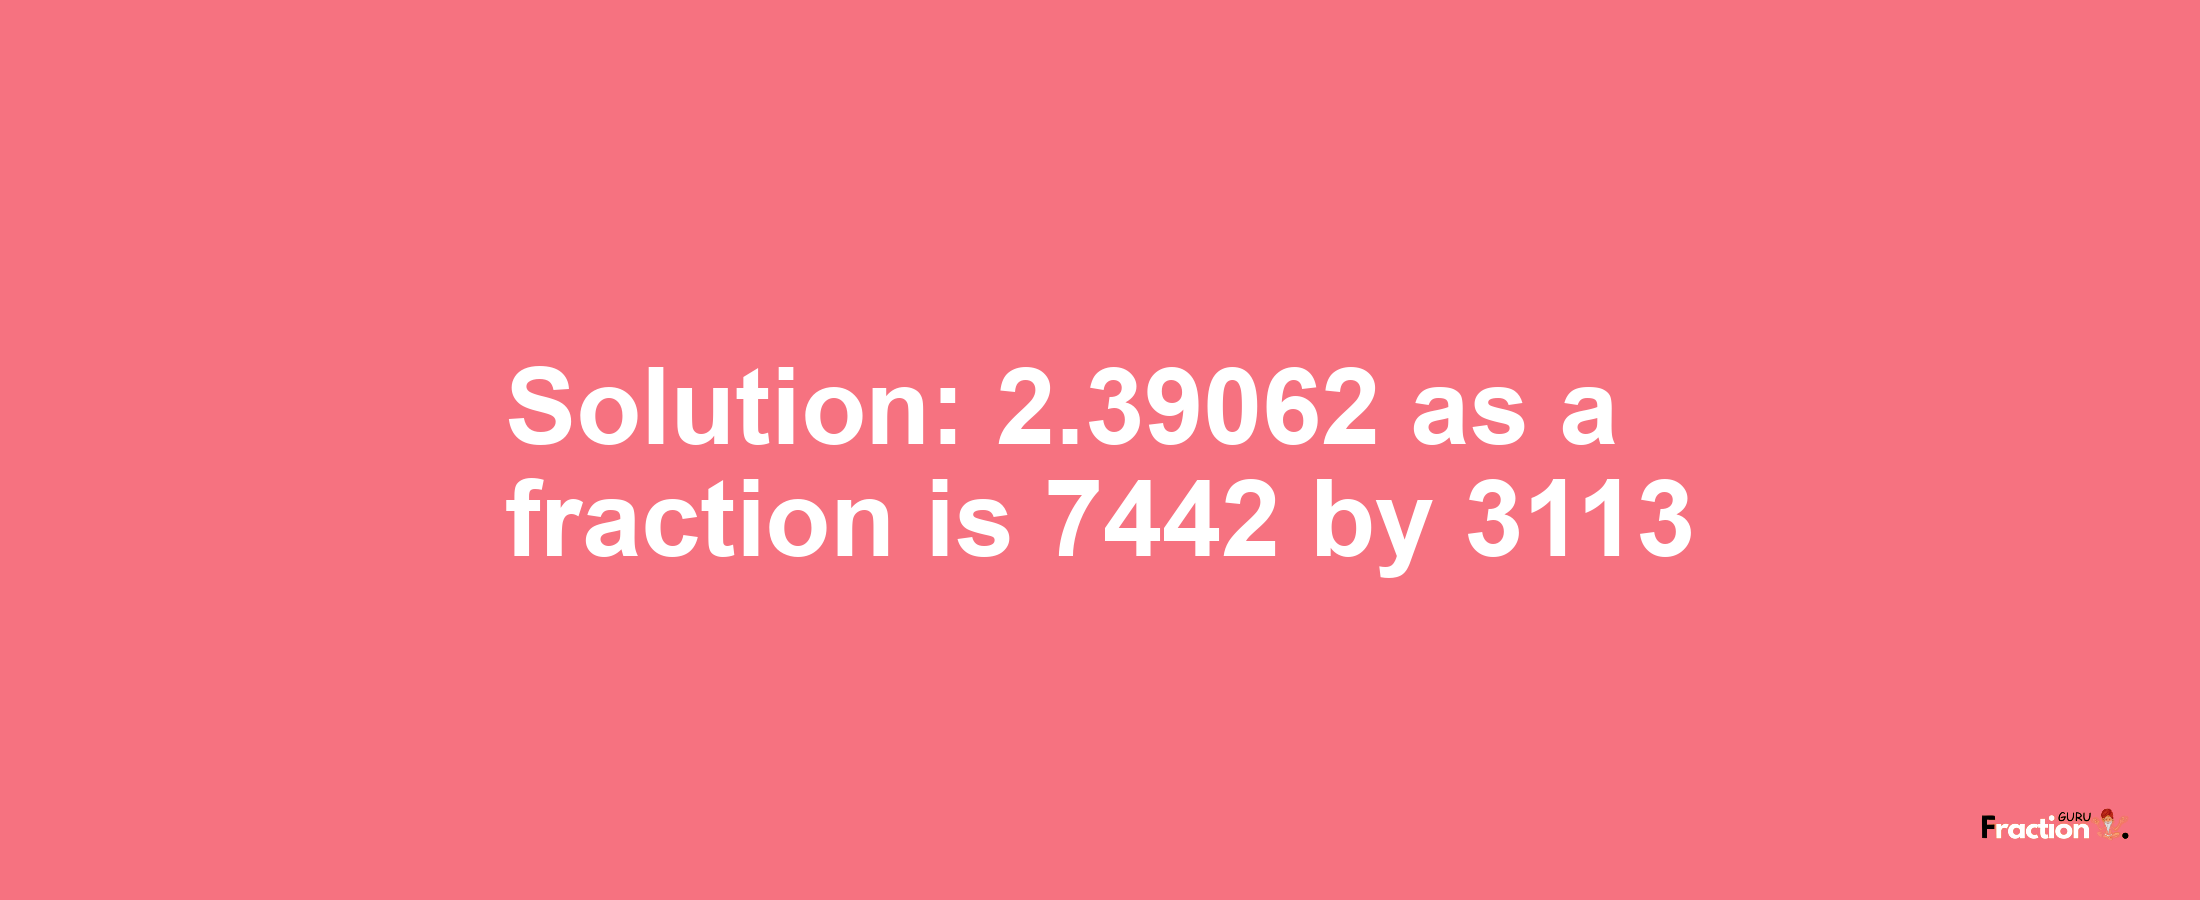 Solution:2.39062 as a fraction is 7442/3113